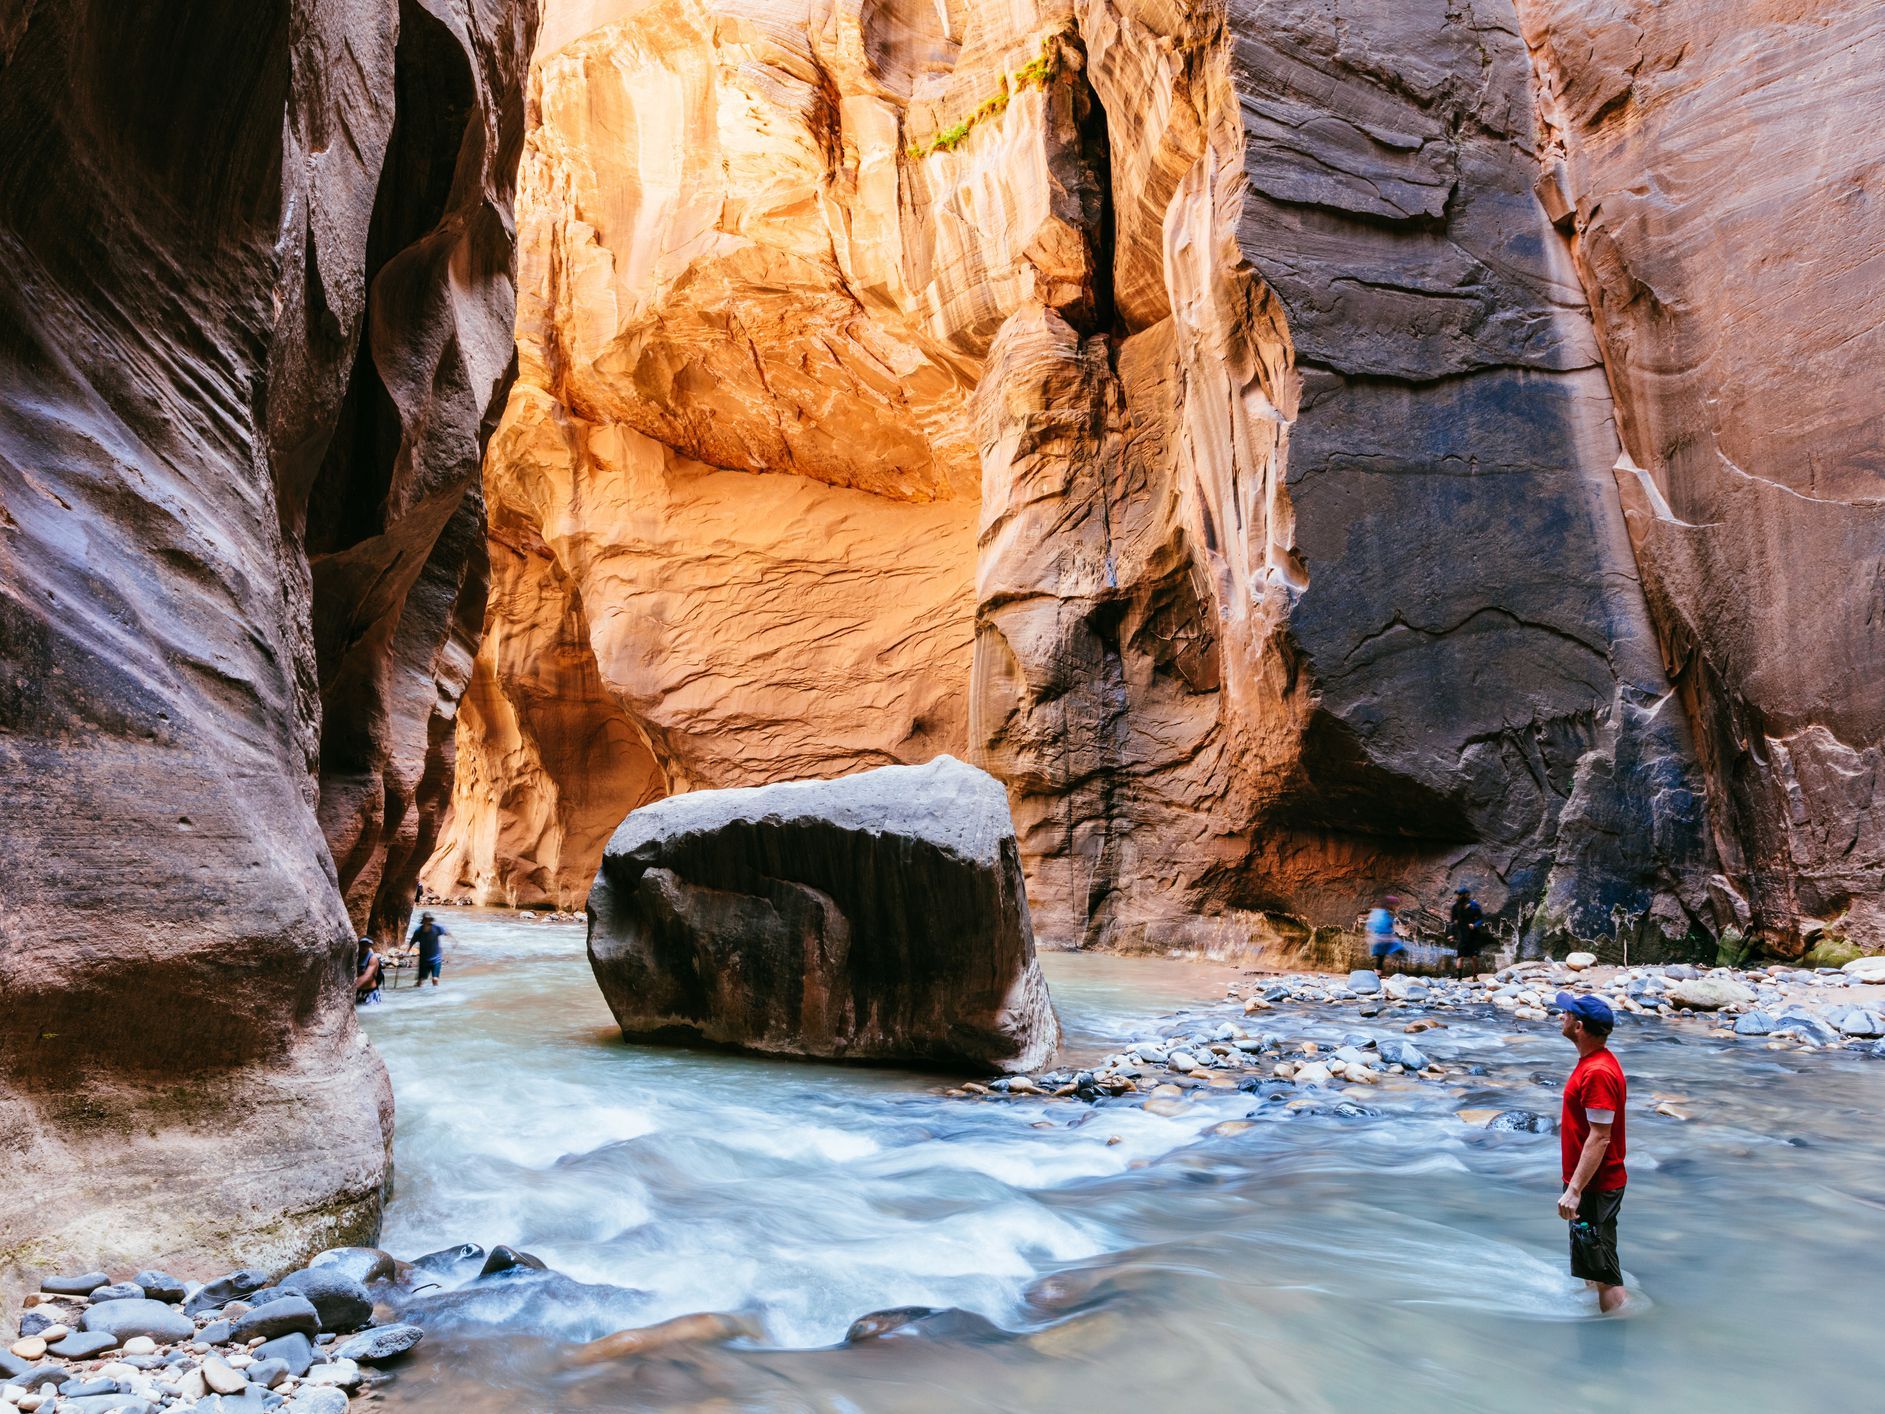 Take a Day Trip to Zion National Park From Las Vegas